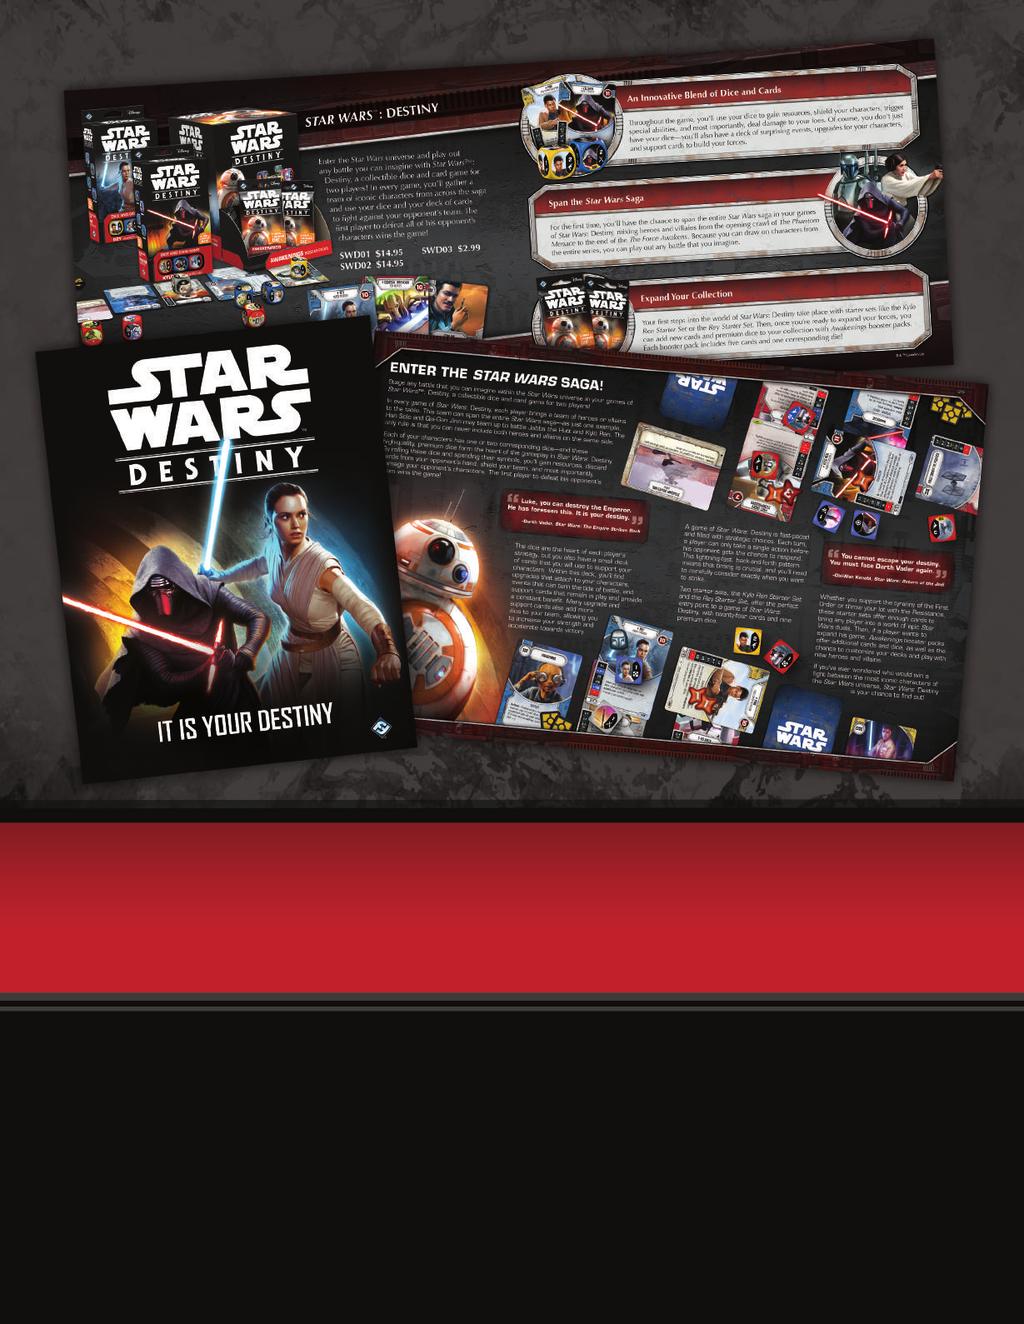 CATALOGS Star Wars: Destiny graces the cover of our Winter 2016 catalog, which will be mailed out to 12,000 customers in mid-november and will be inserted into all FFG products going forward.